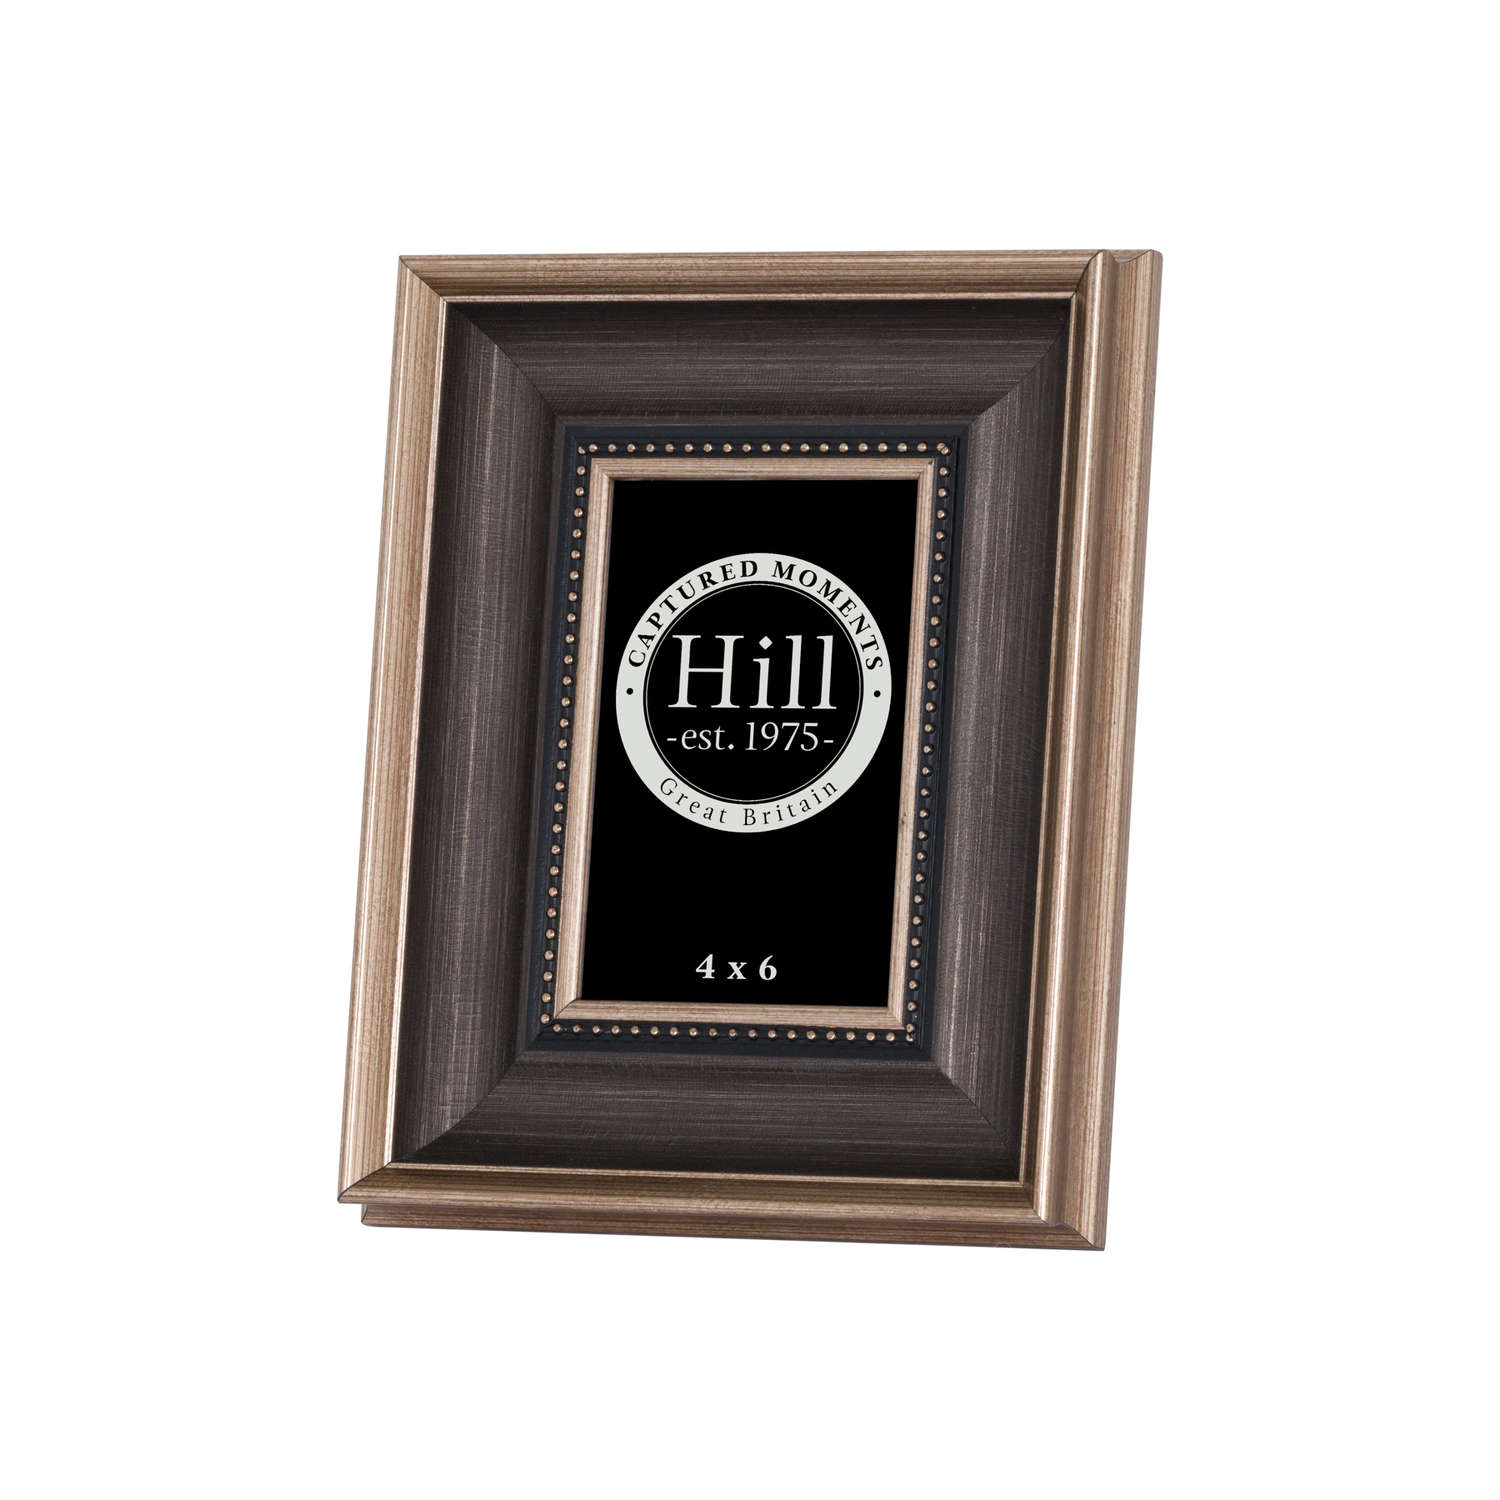 Antique Gold With Black Detail Photo Frame 4X6 - Image 1